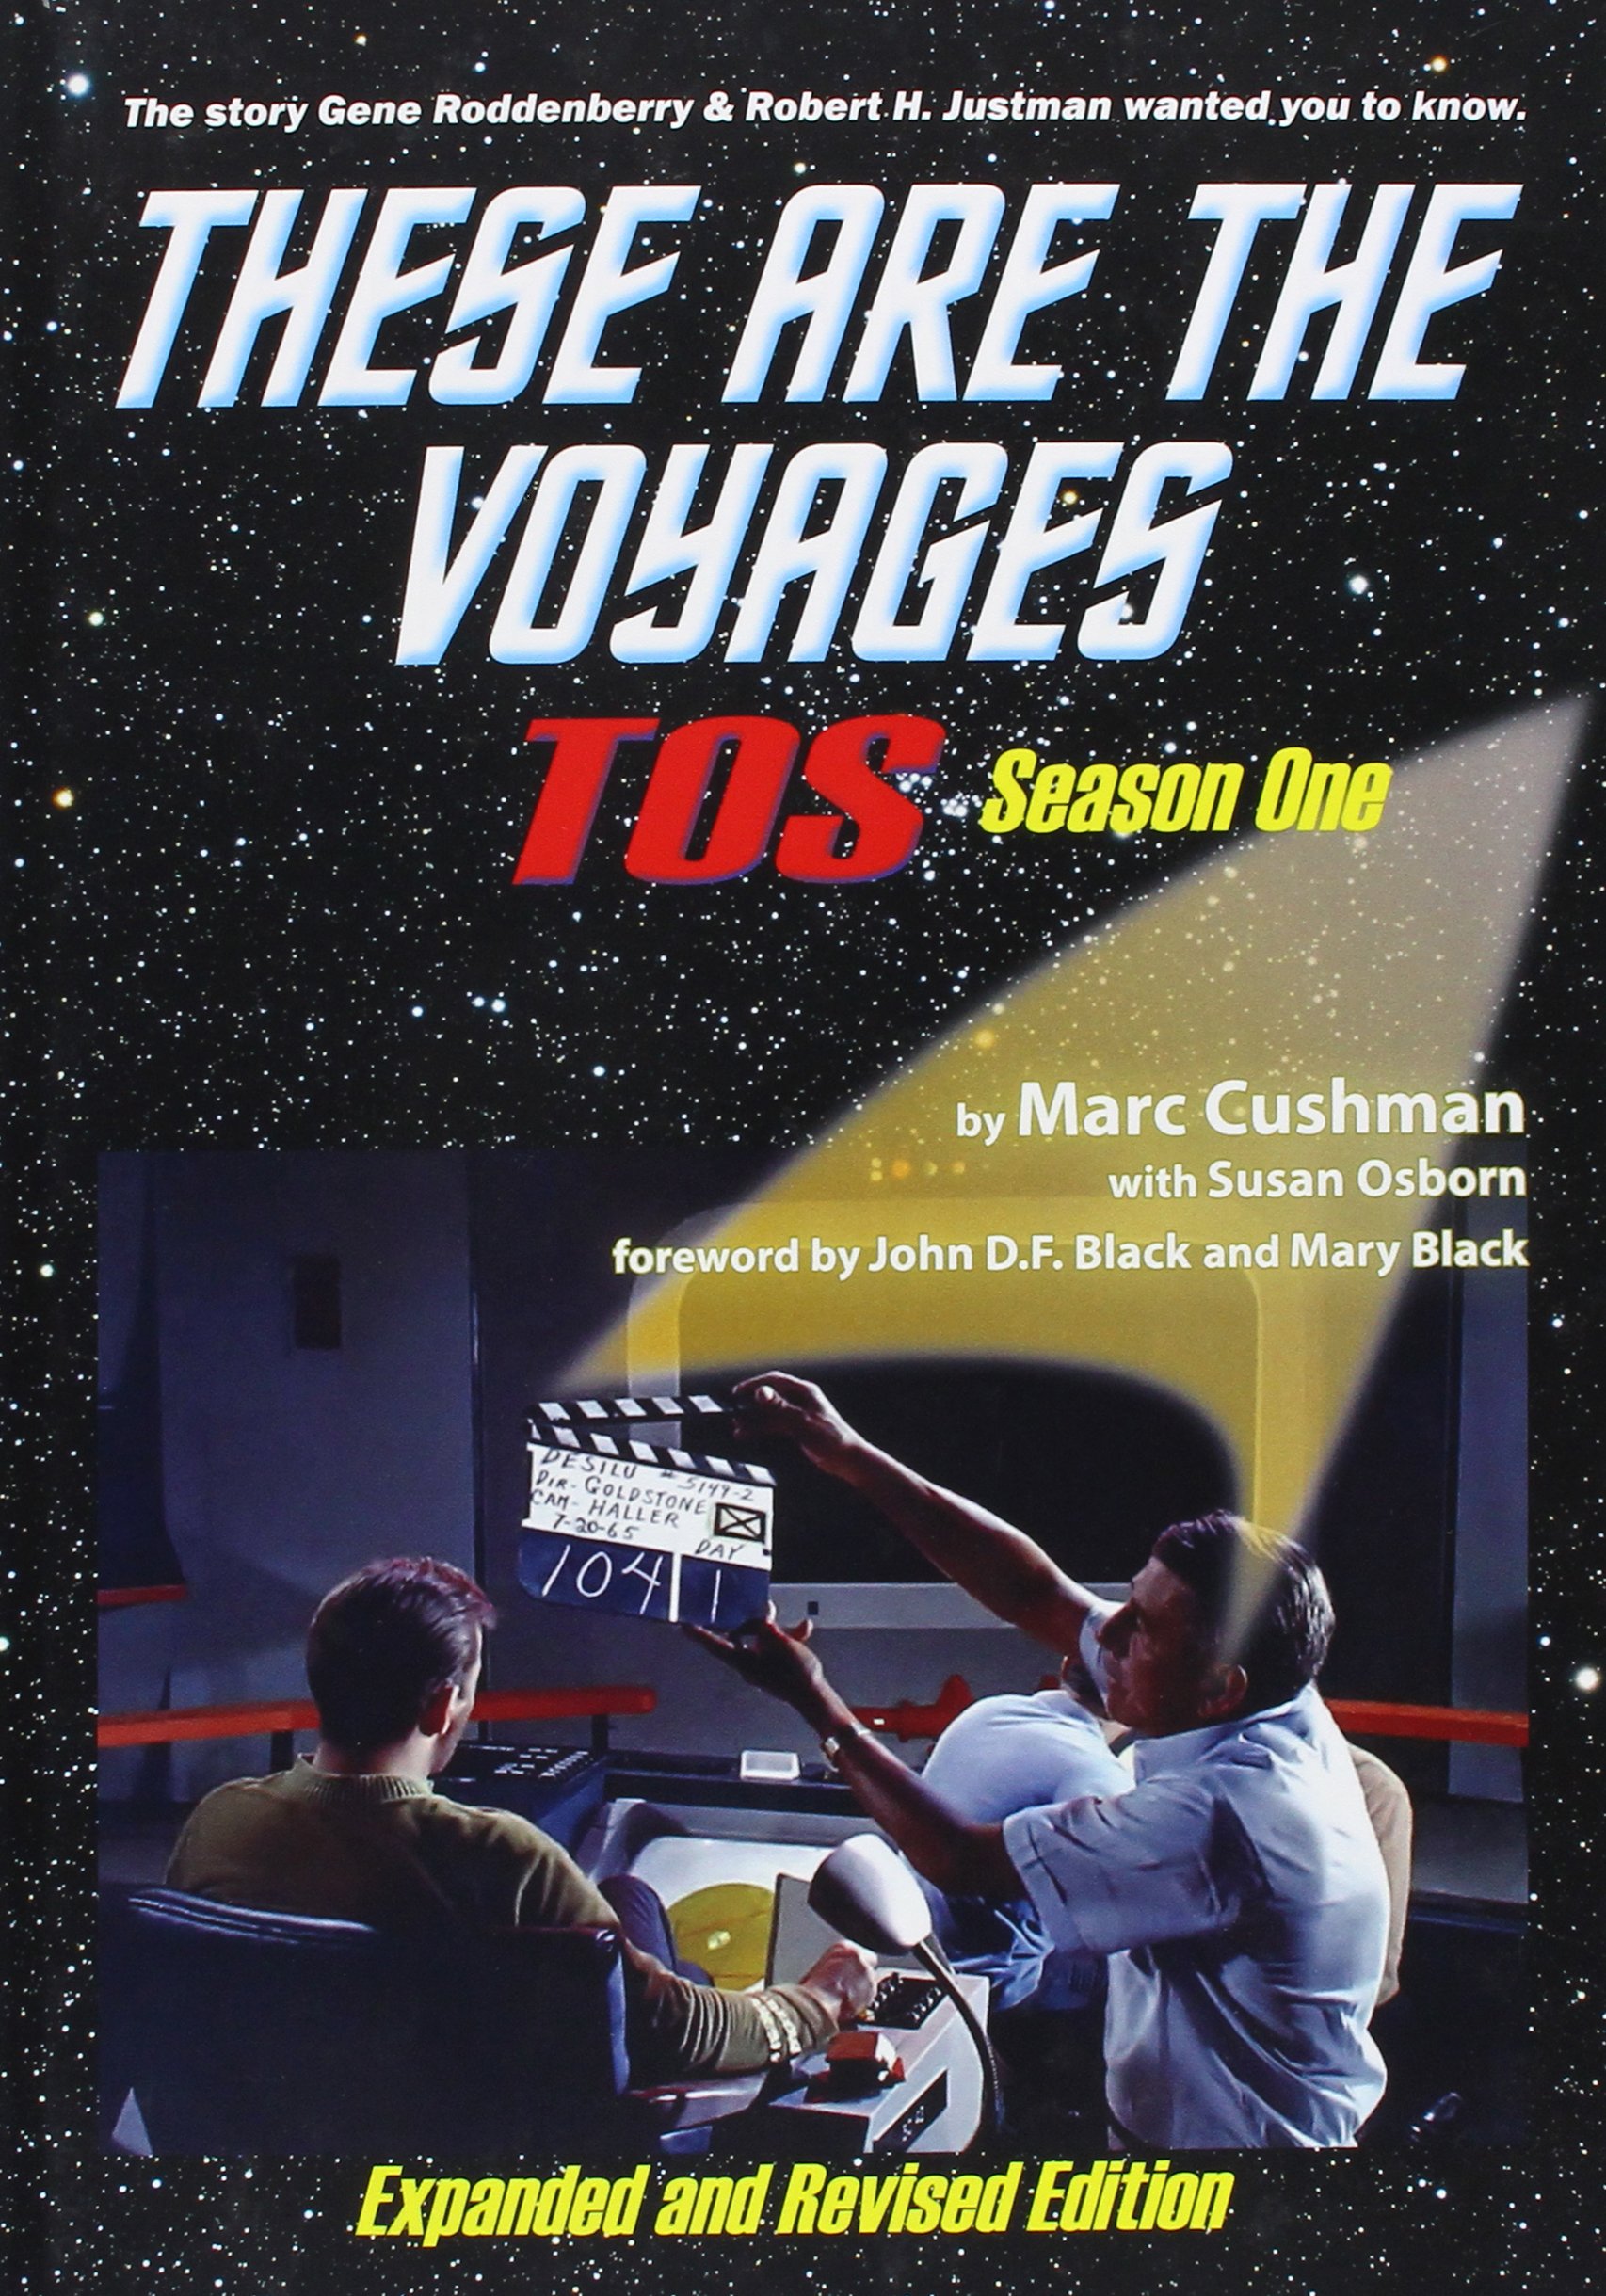 “These Are the Voyages: TOS: Season 1 Revised and Expanded Edition” Review by Jimsscifi.blogspot.com